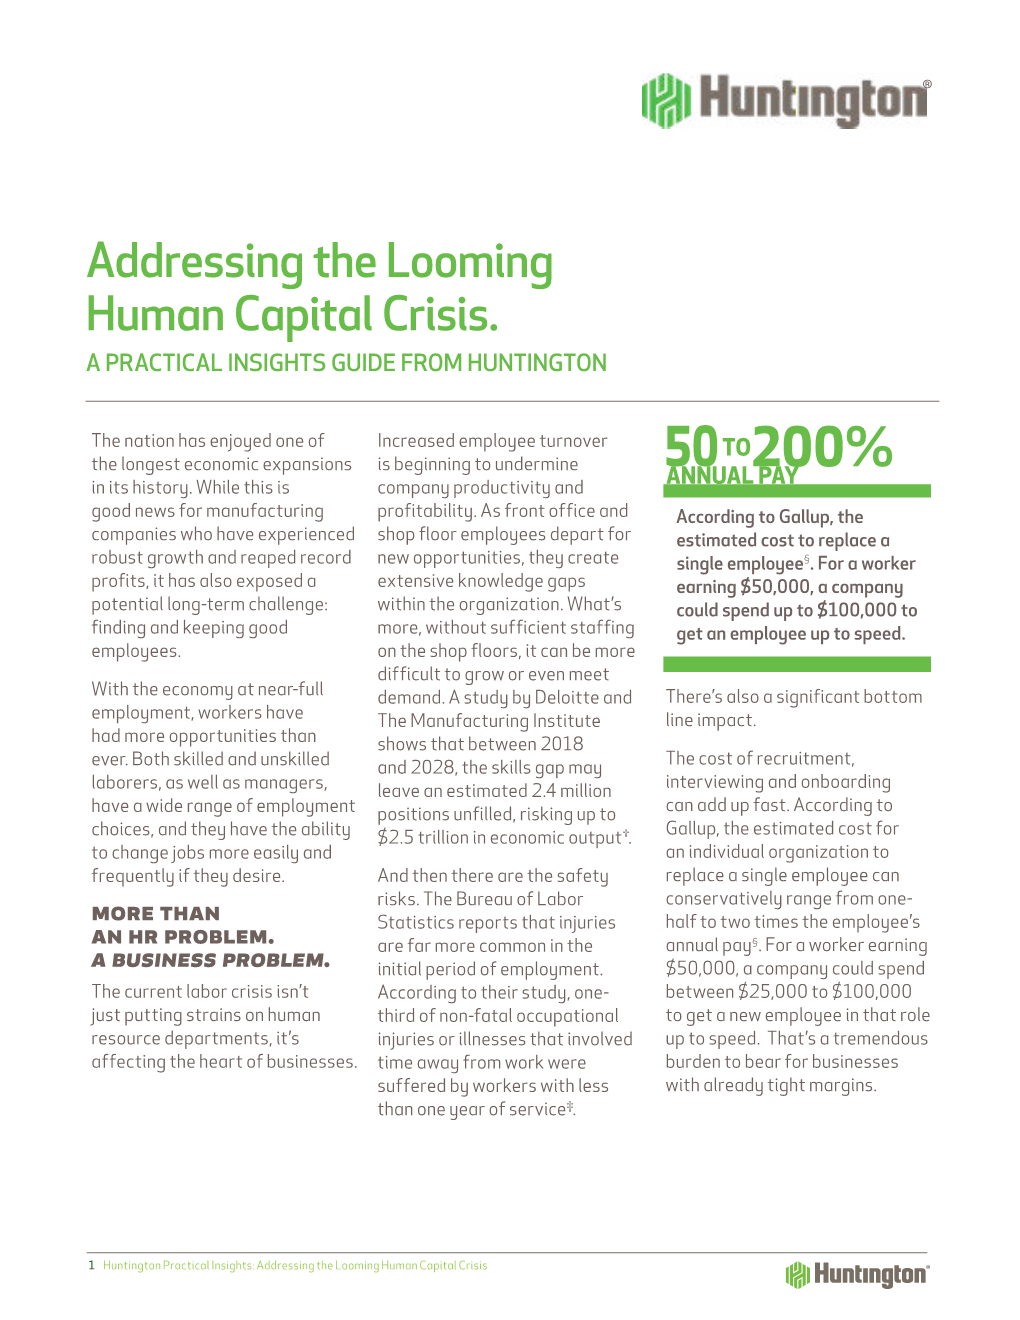 Addressing the Looming Human Capital Crisis. a PRACTICAL INSIGHTS GUIDE from HUNTINGTON